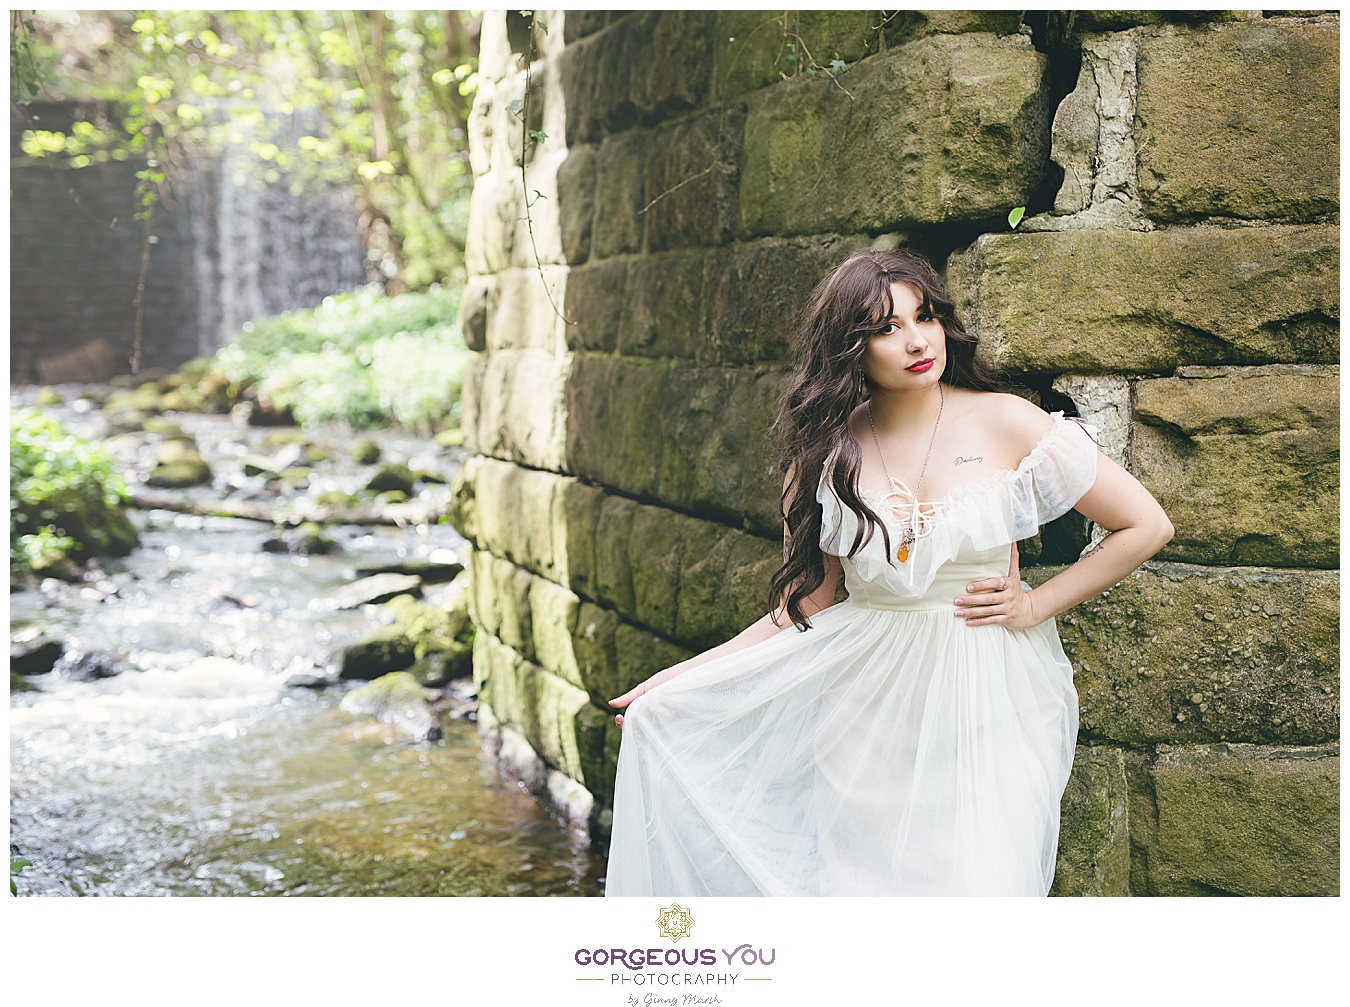 Floaty white dress leaning against a stone wall | Divine feminine goddess boudoir photoshoot | Gorgeous You Photography | North Yorkshire